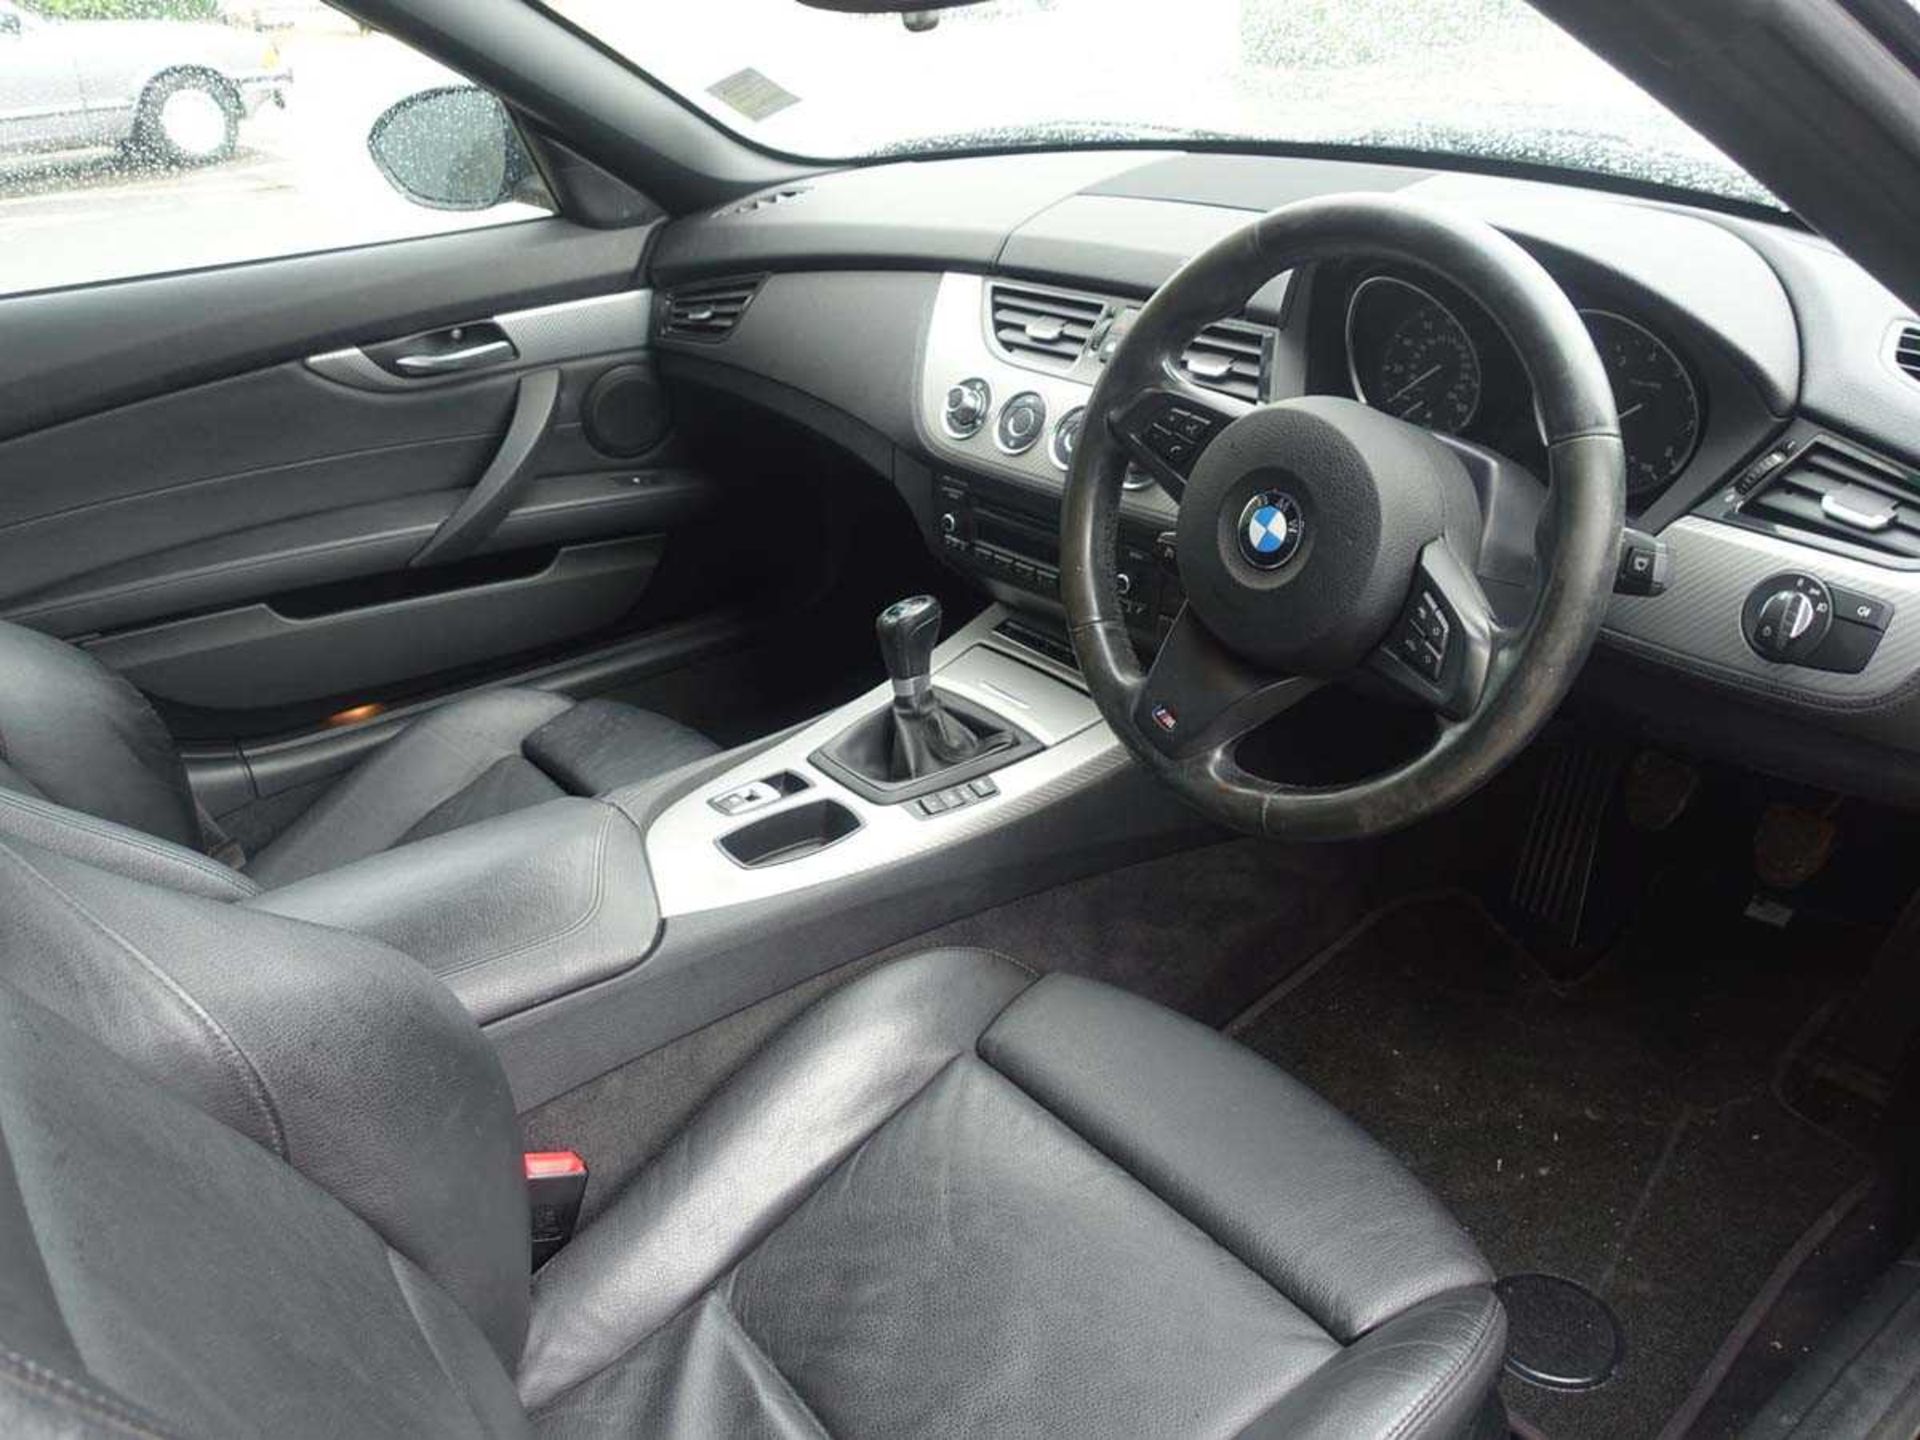 (2013) BMW ZR Drive 18I M sport convertible in black, petrol 1997cc, first registered 13/05/ - Image 7 of 19